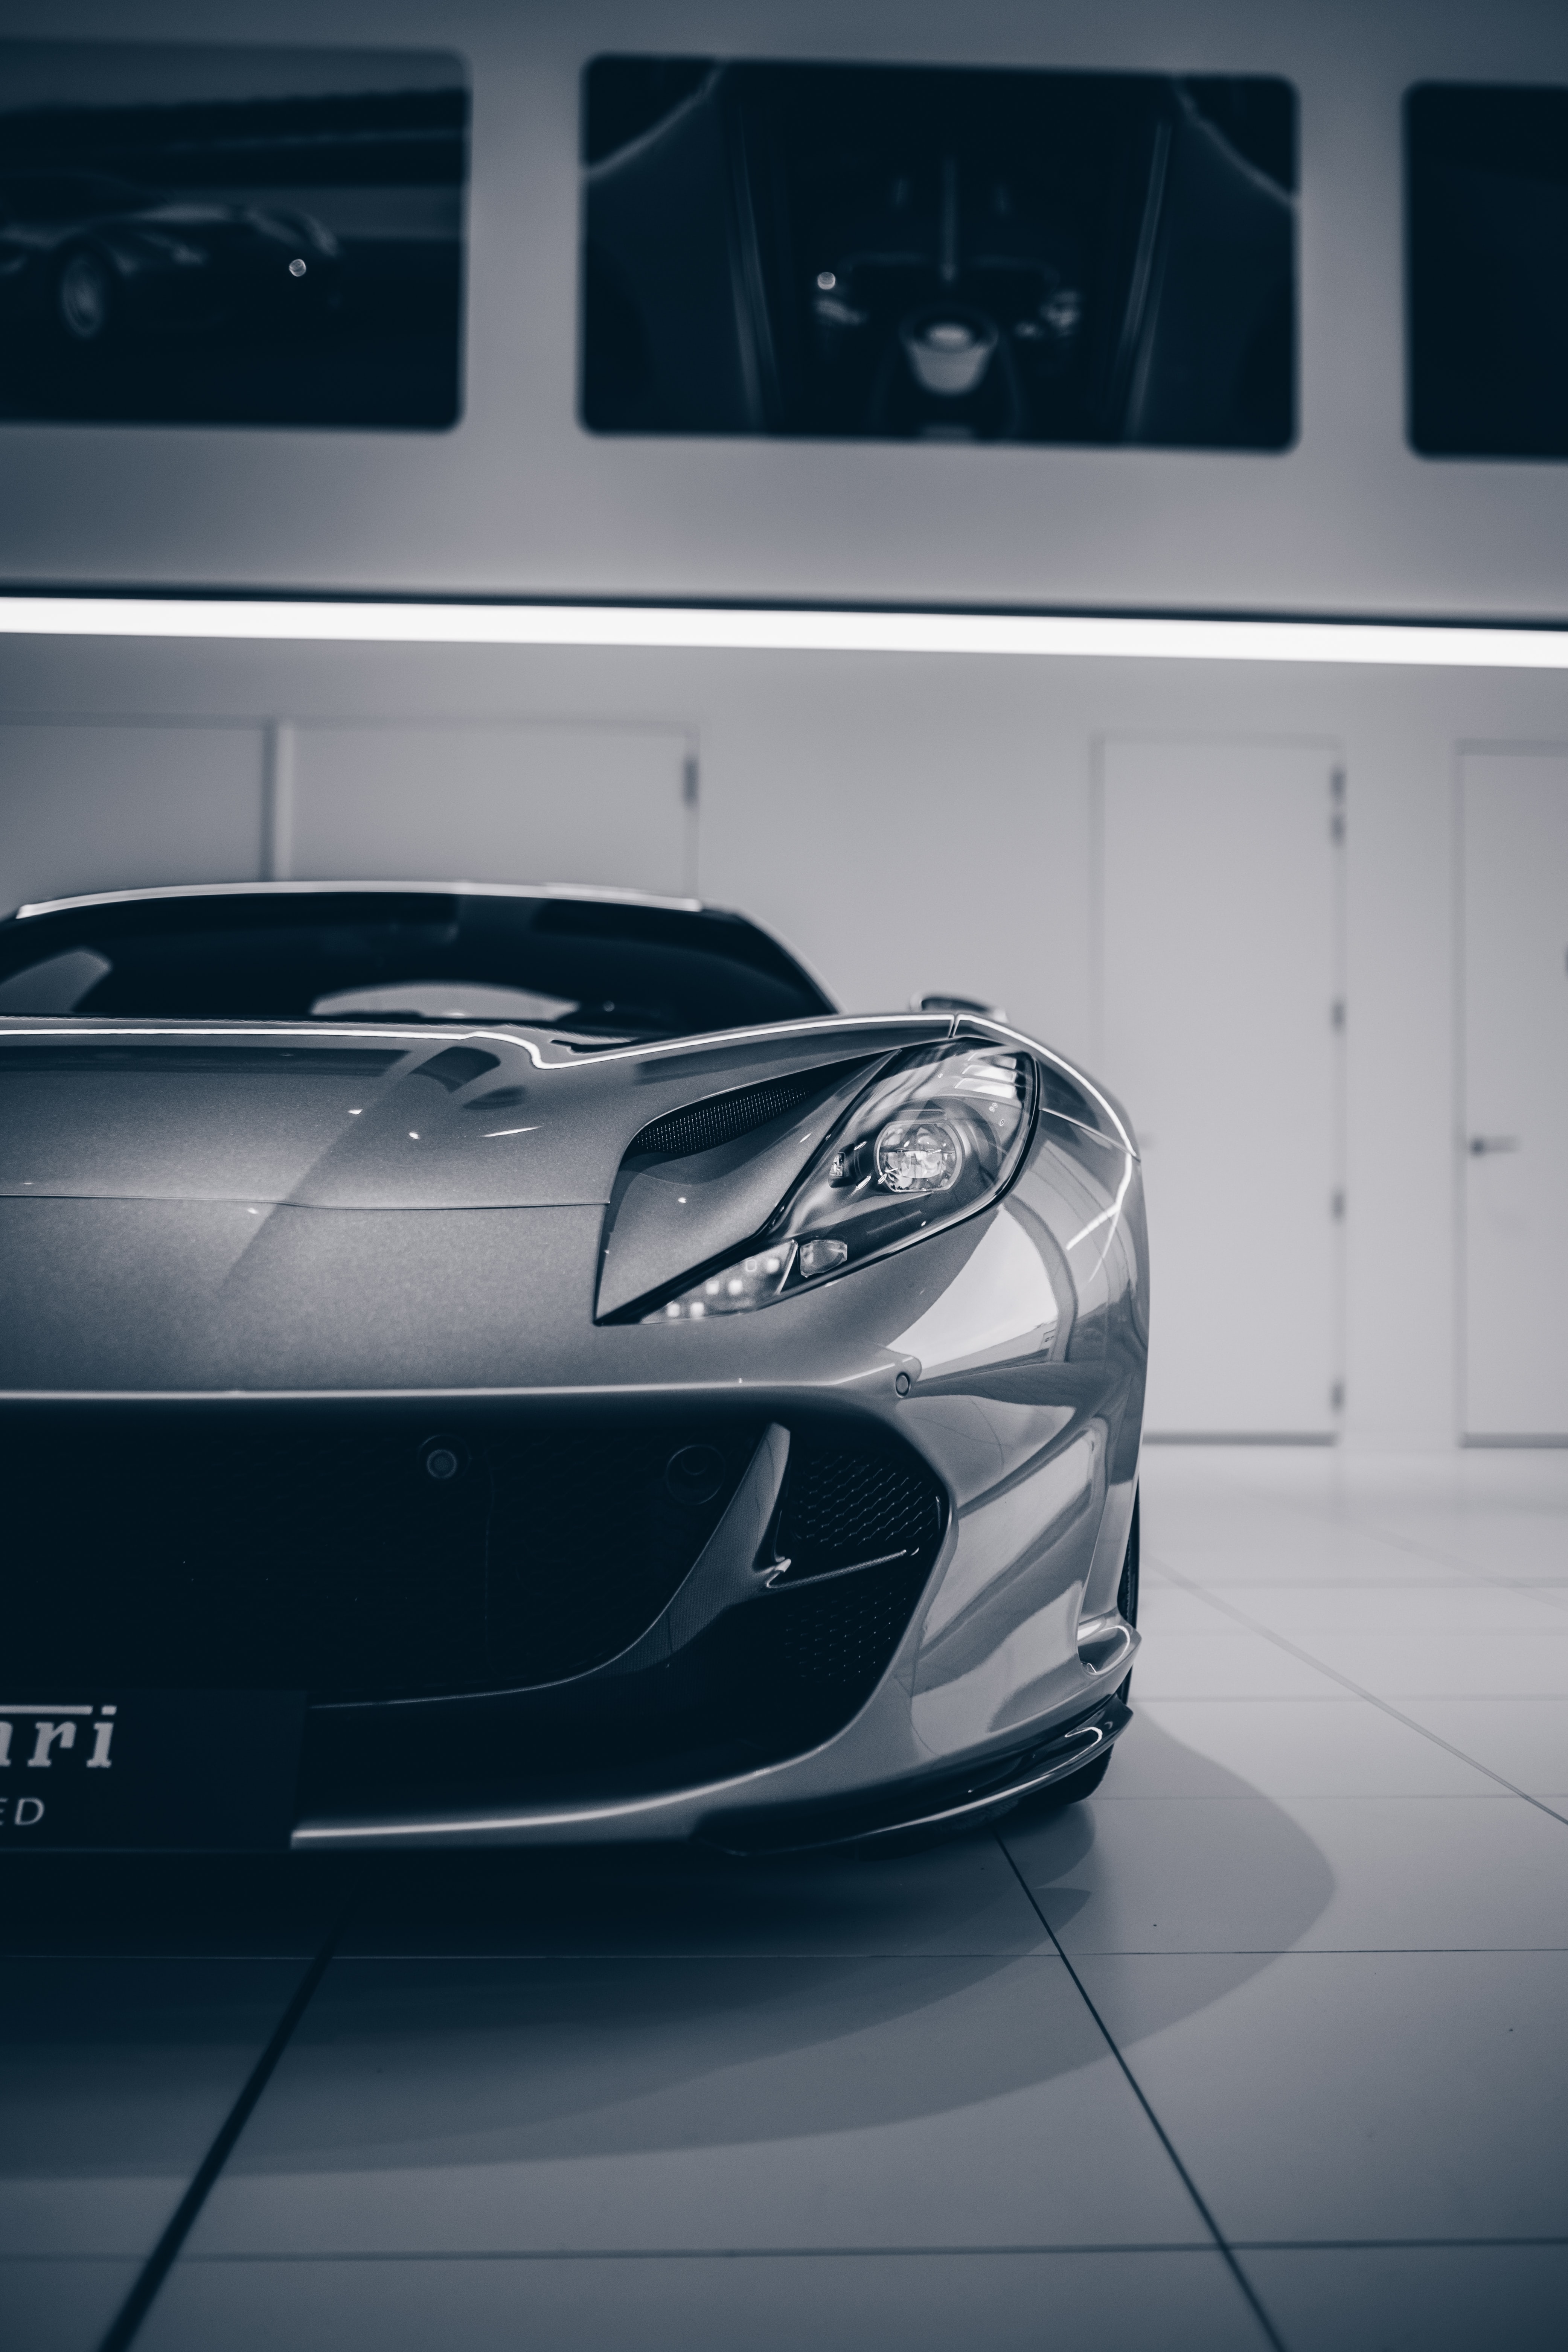 grey, cars, sports, car, front view, machine, sports car Image for desktop